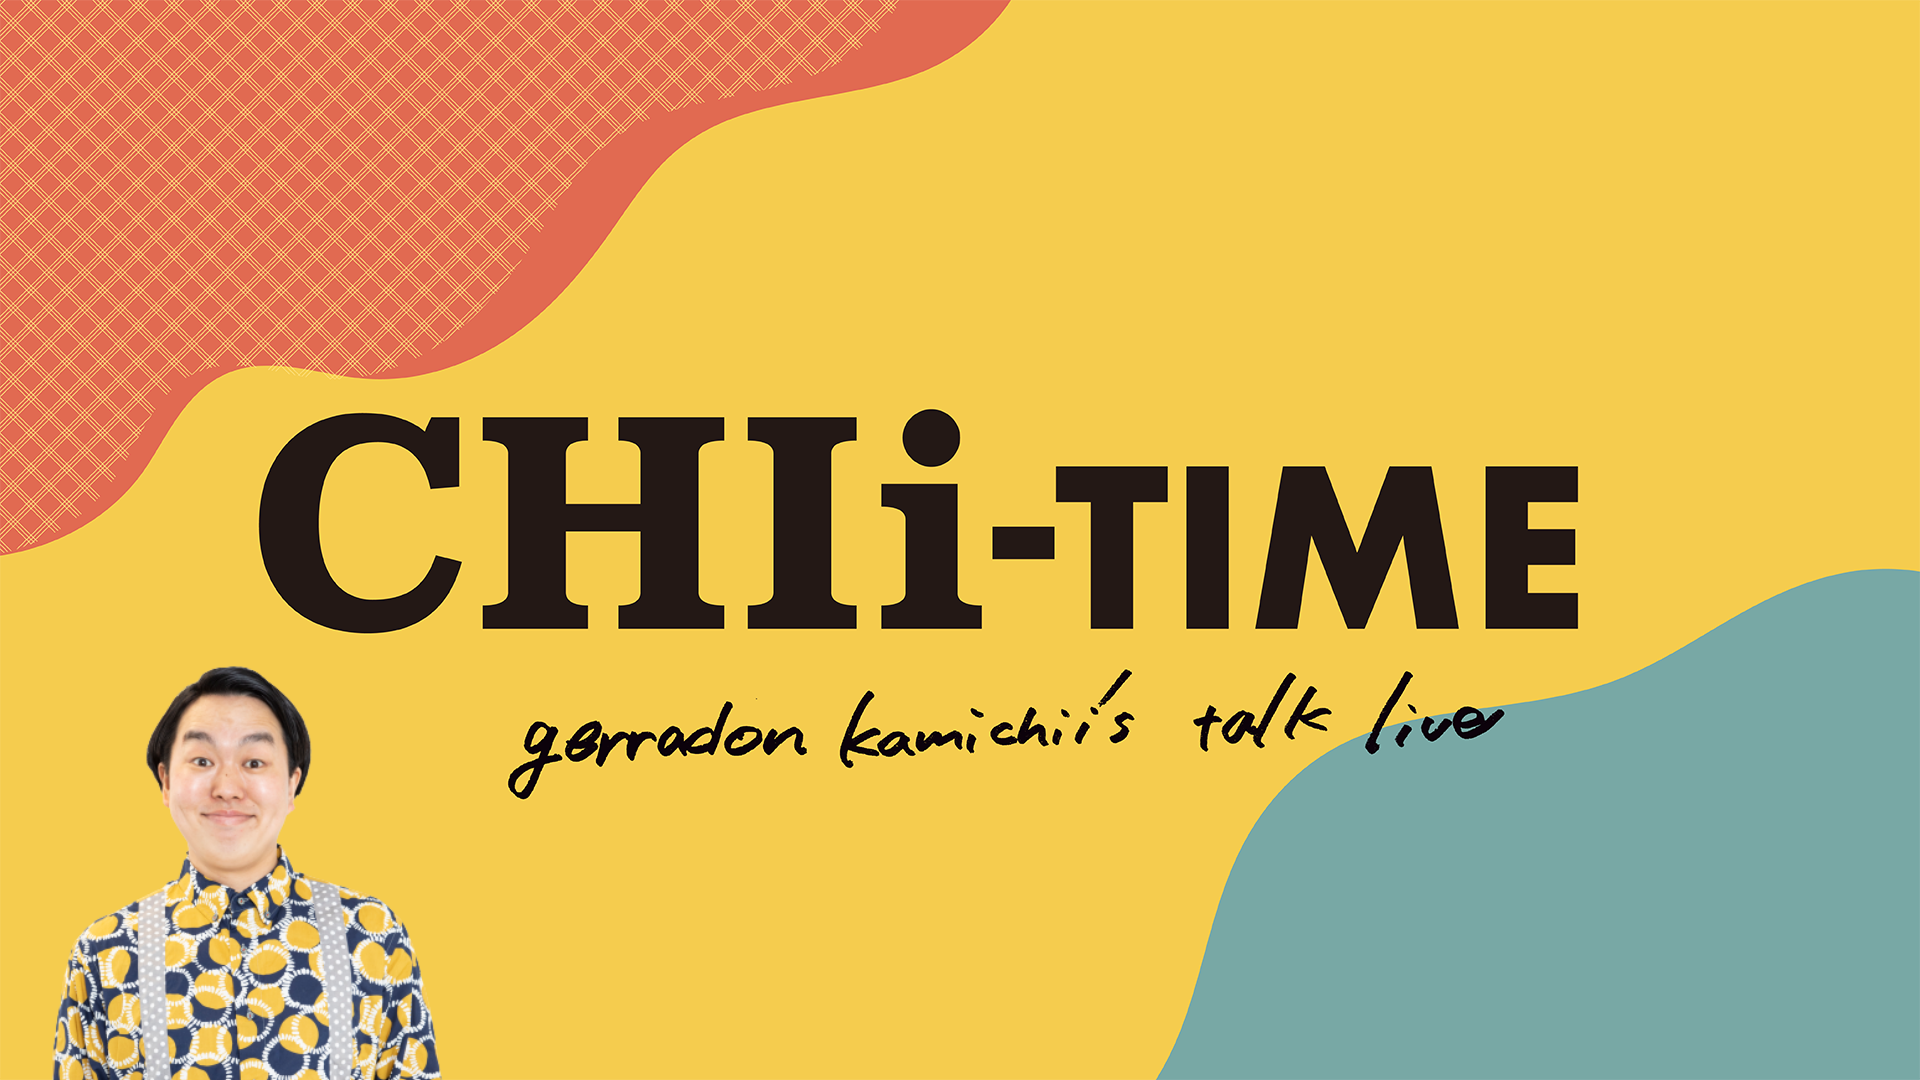 CHIi-TIME vol.49（8/18　21:00）